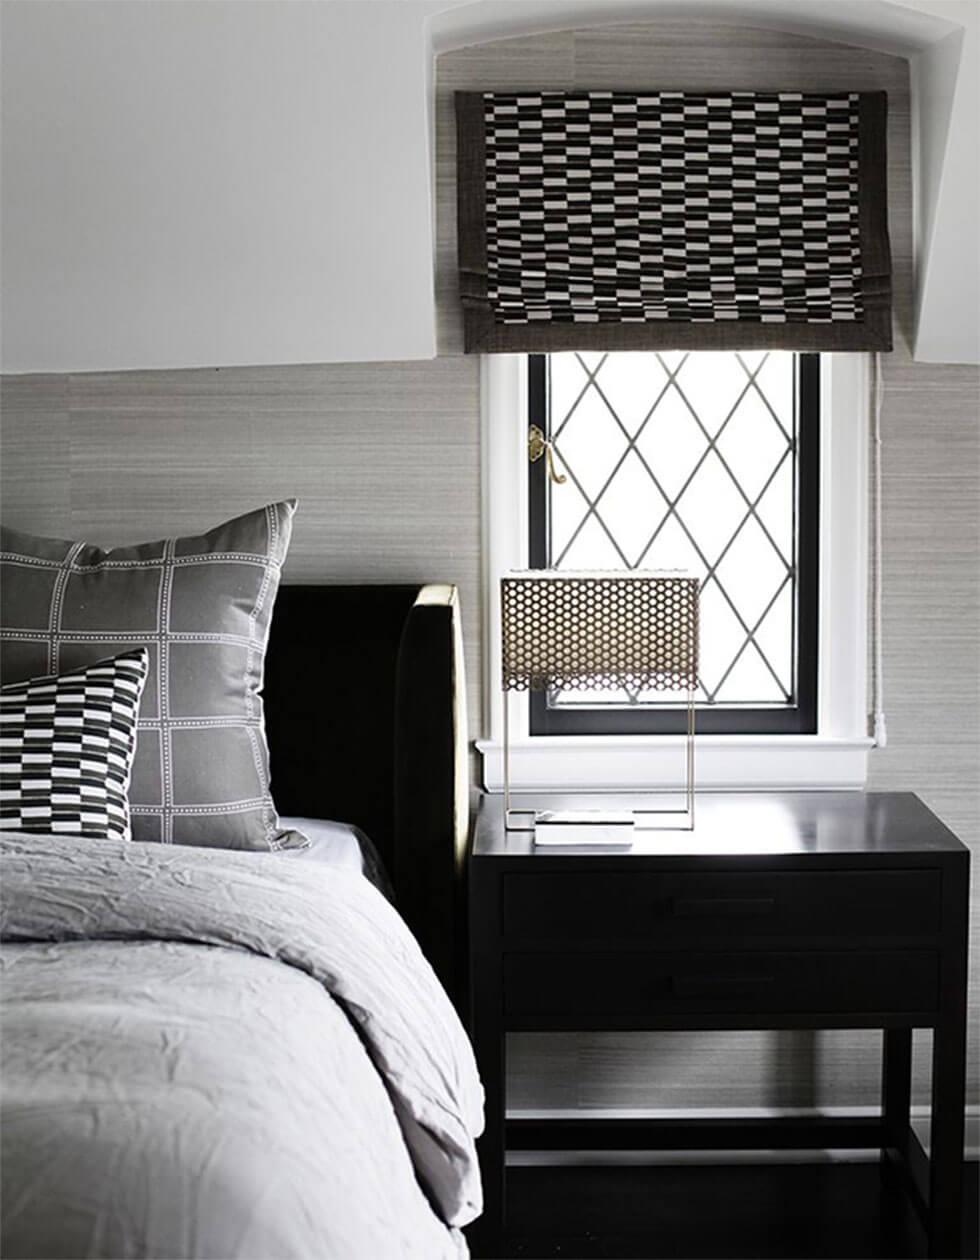 Black and white bedroom with patterned blinds and cushions